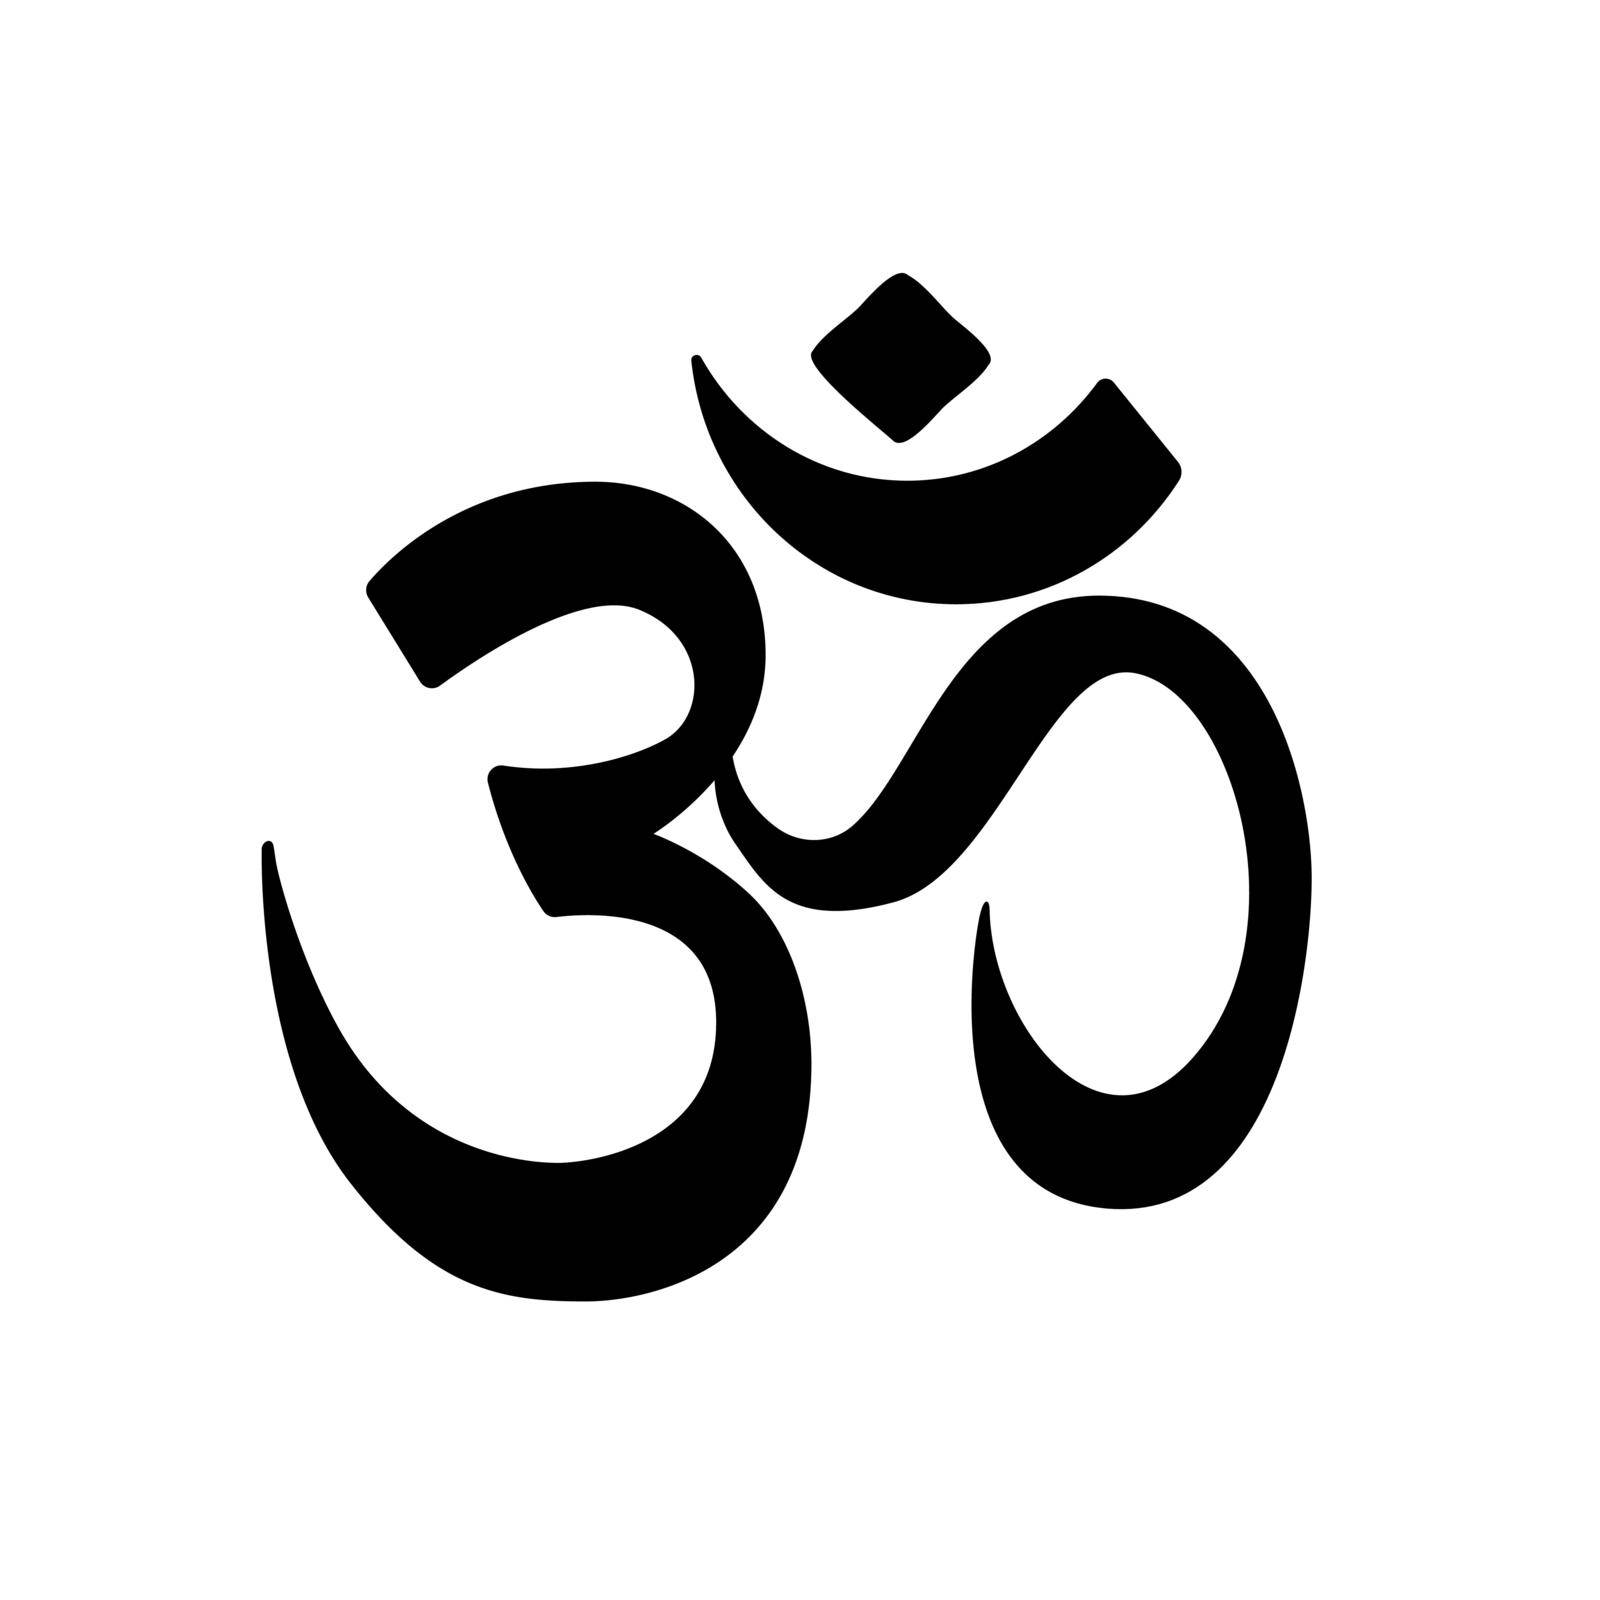 Om symbol. Religious symbol of Hinduism. Vector illustration. by Chekman